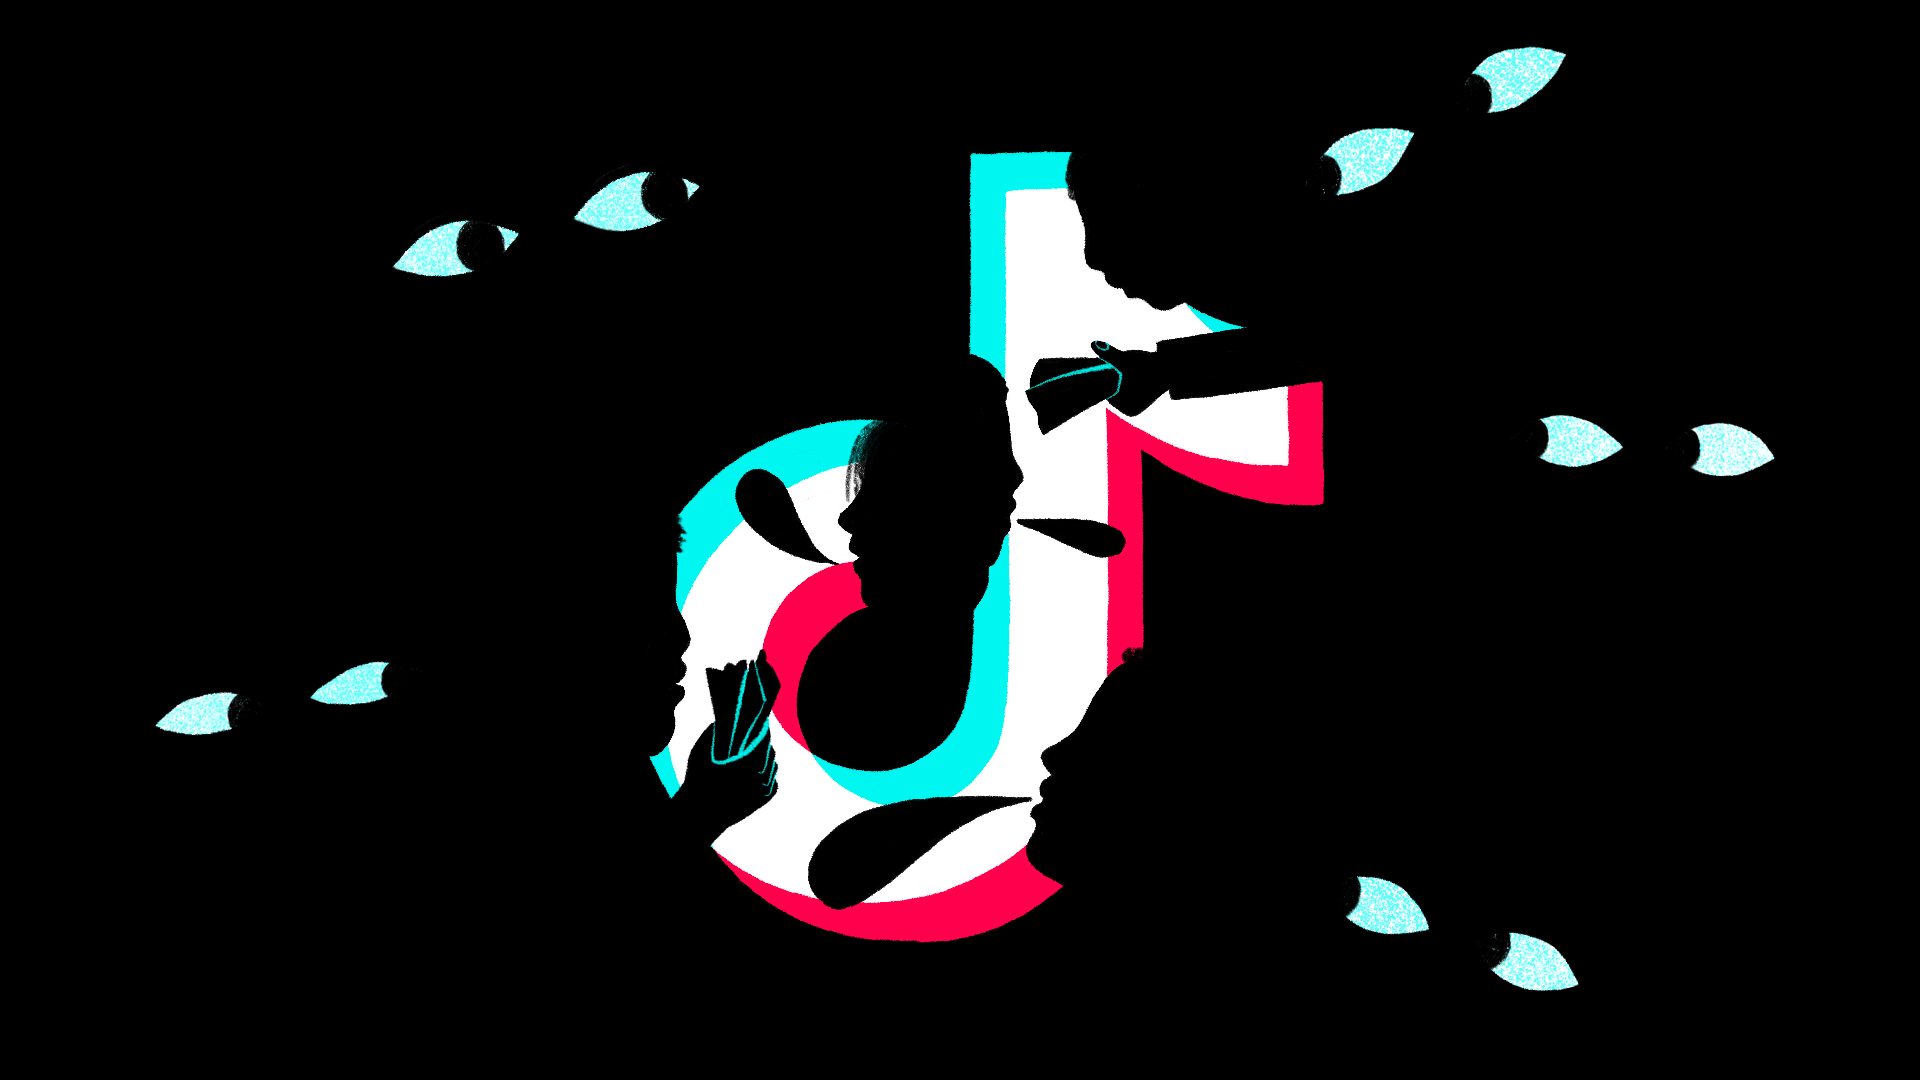 Illustration of five sets of eyes focusing on a TikTok logo. You can see darkened silhouettes of people talking and passing money to others within the logo.